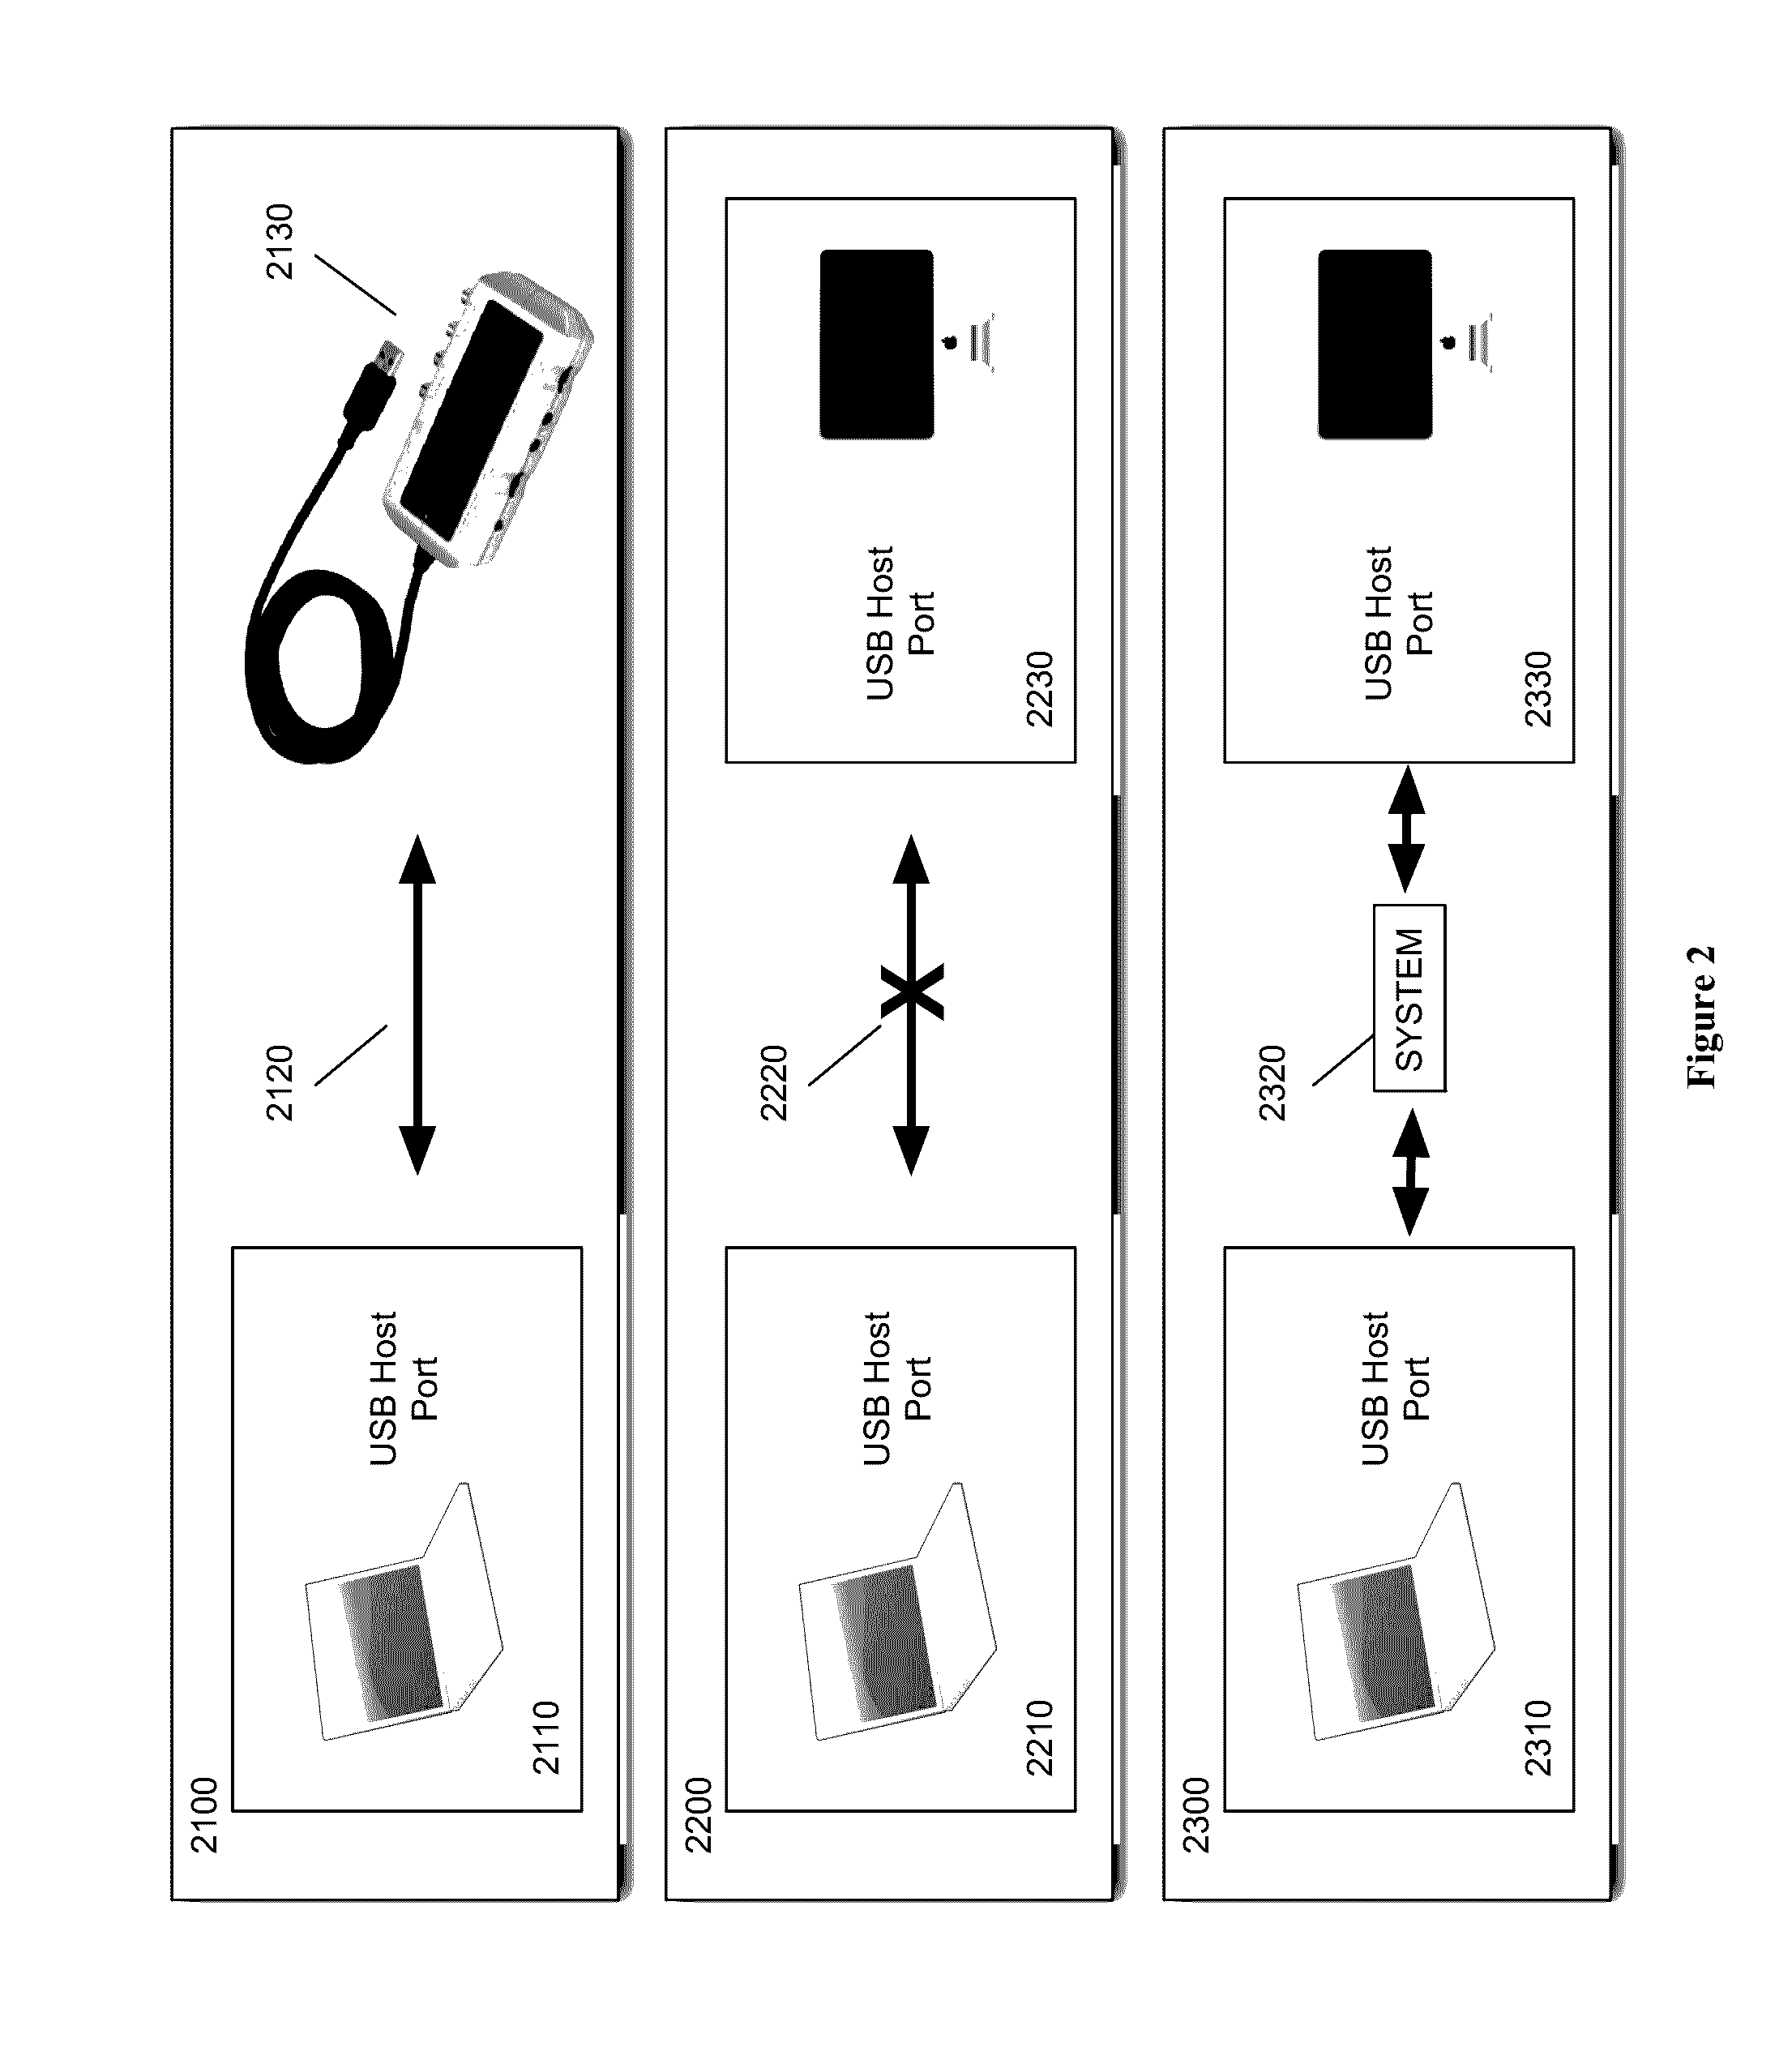 System and method for audio pass-through that has at least two USB ports between multiple host computing devices